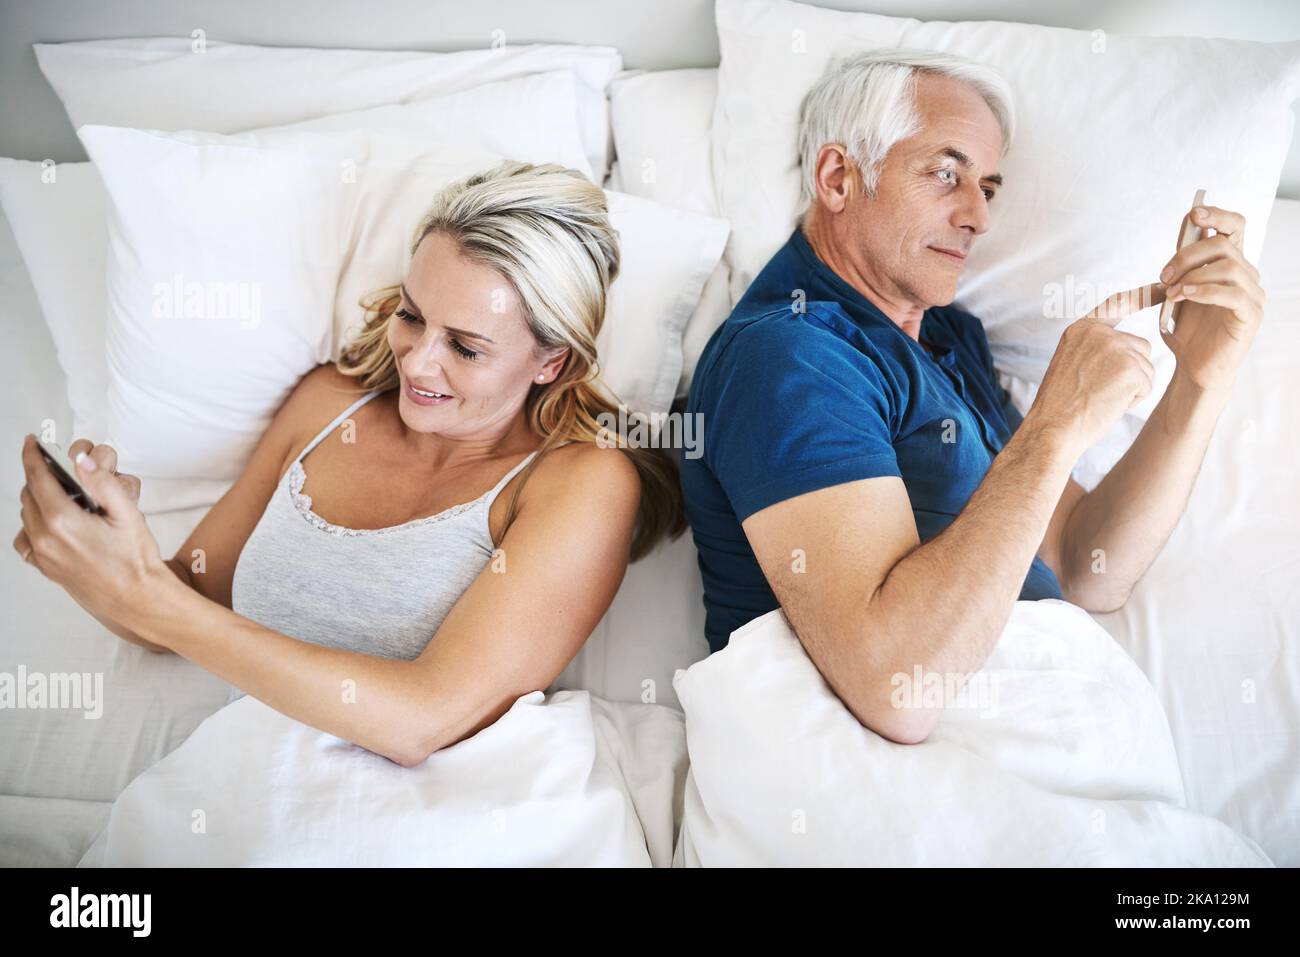 Caught up with their own connections. a mature couple using their cellphones in bed at home. Stock Photo